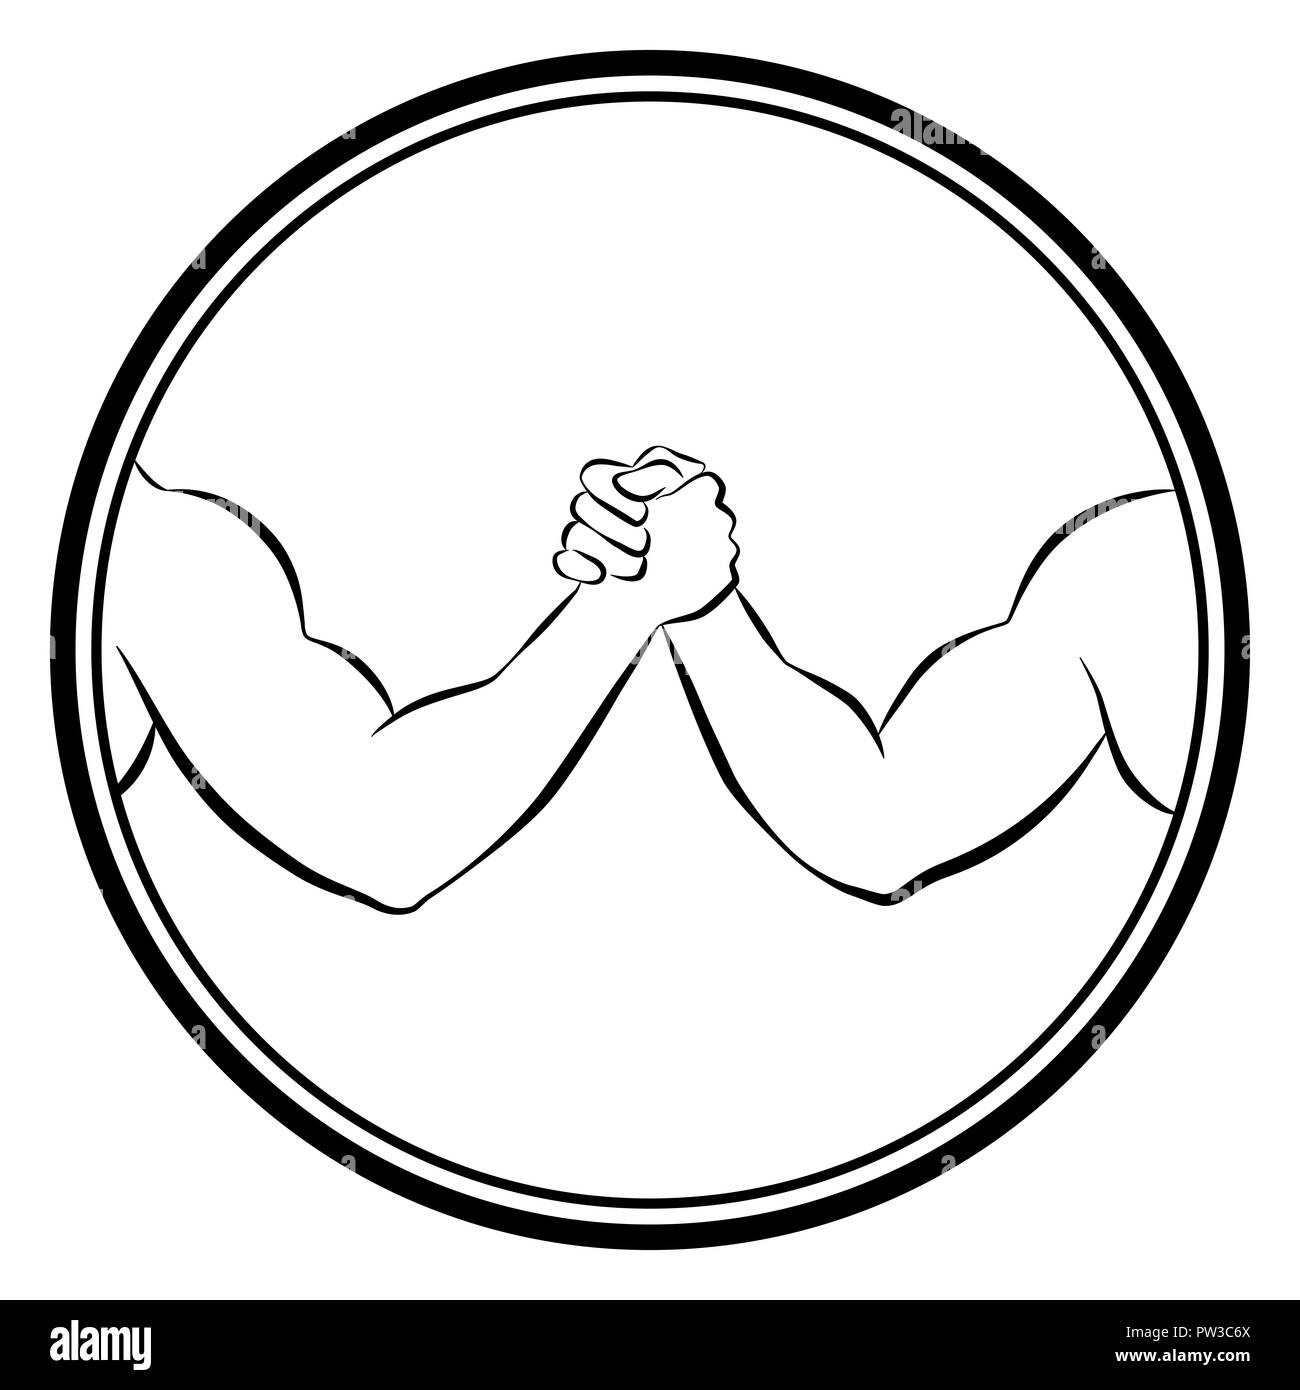 Arm Wrestling Wettbewerb Runde Logo Outline Abbildung Auf Weissen Hintergrund Stockfotografie Alamy The goal is to pin the other's arm onto the surface, the winner's arm over the loser's arm. alamy